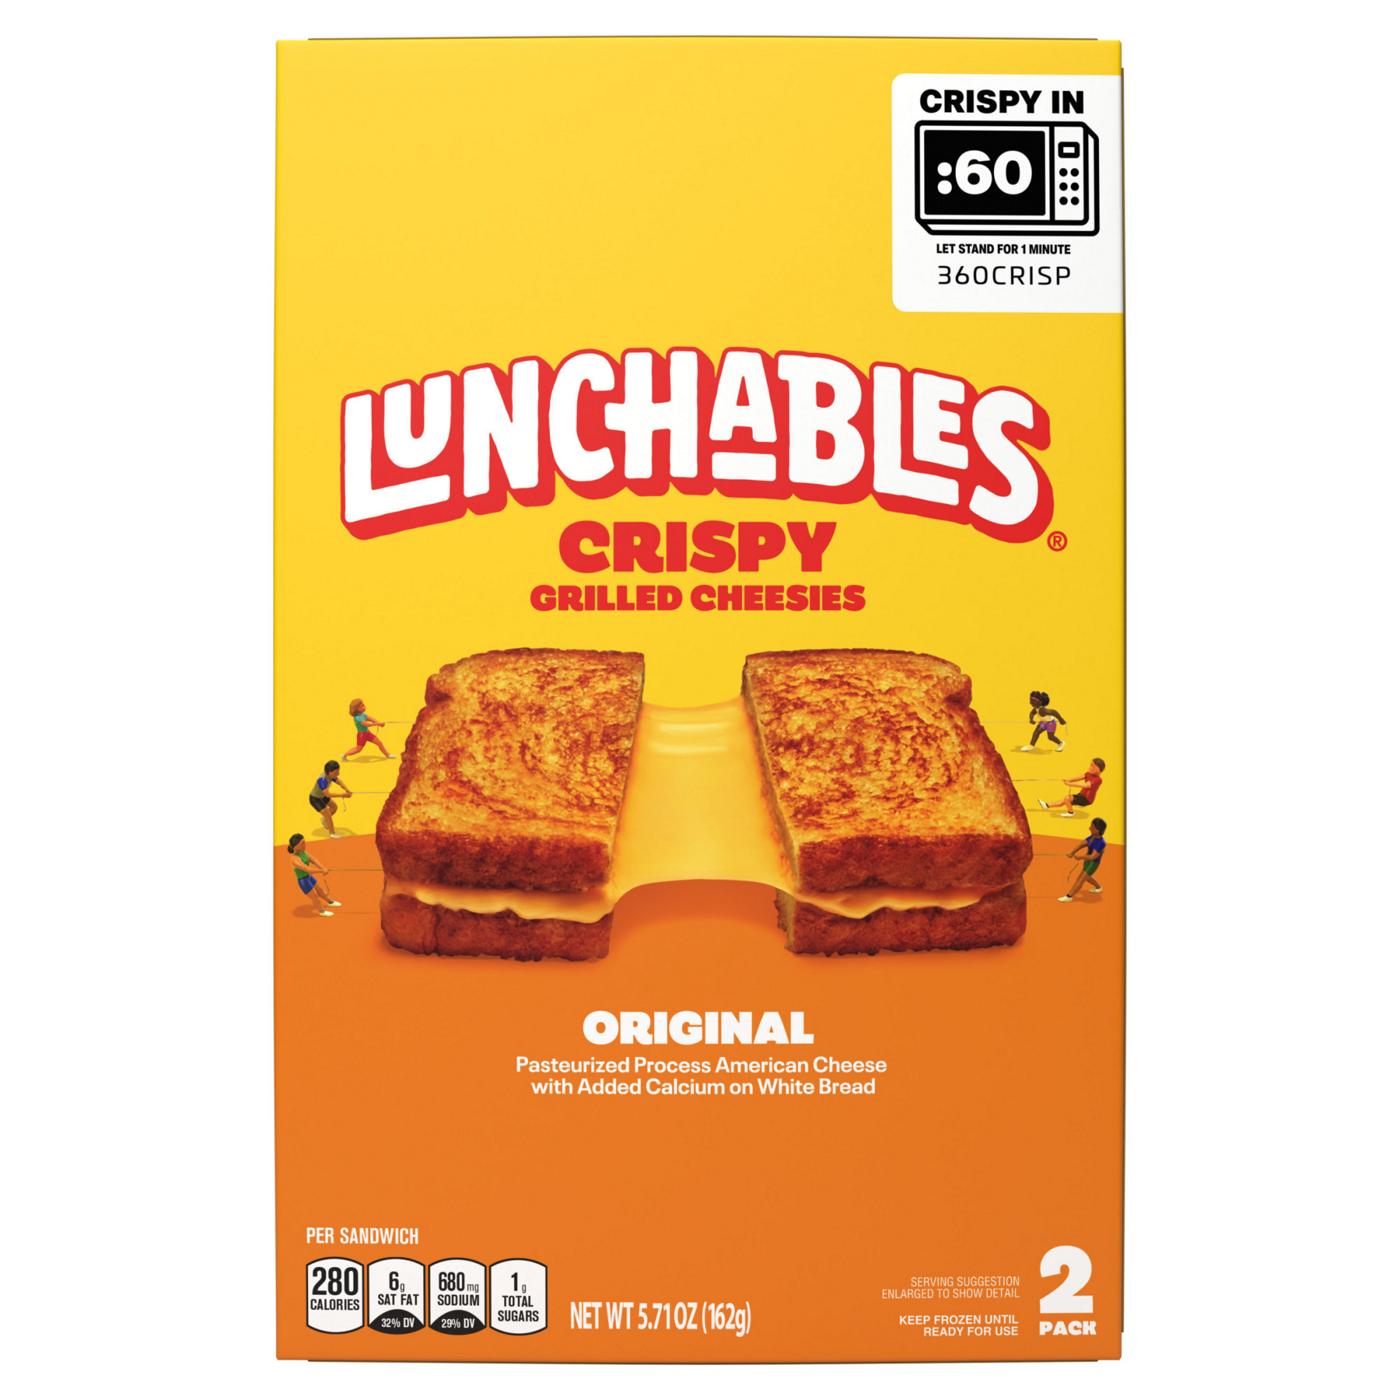 Lunchables Crispy Grilled Cheesies Frozen Sandwiches - Original; image 3 of 9